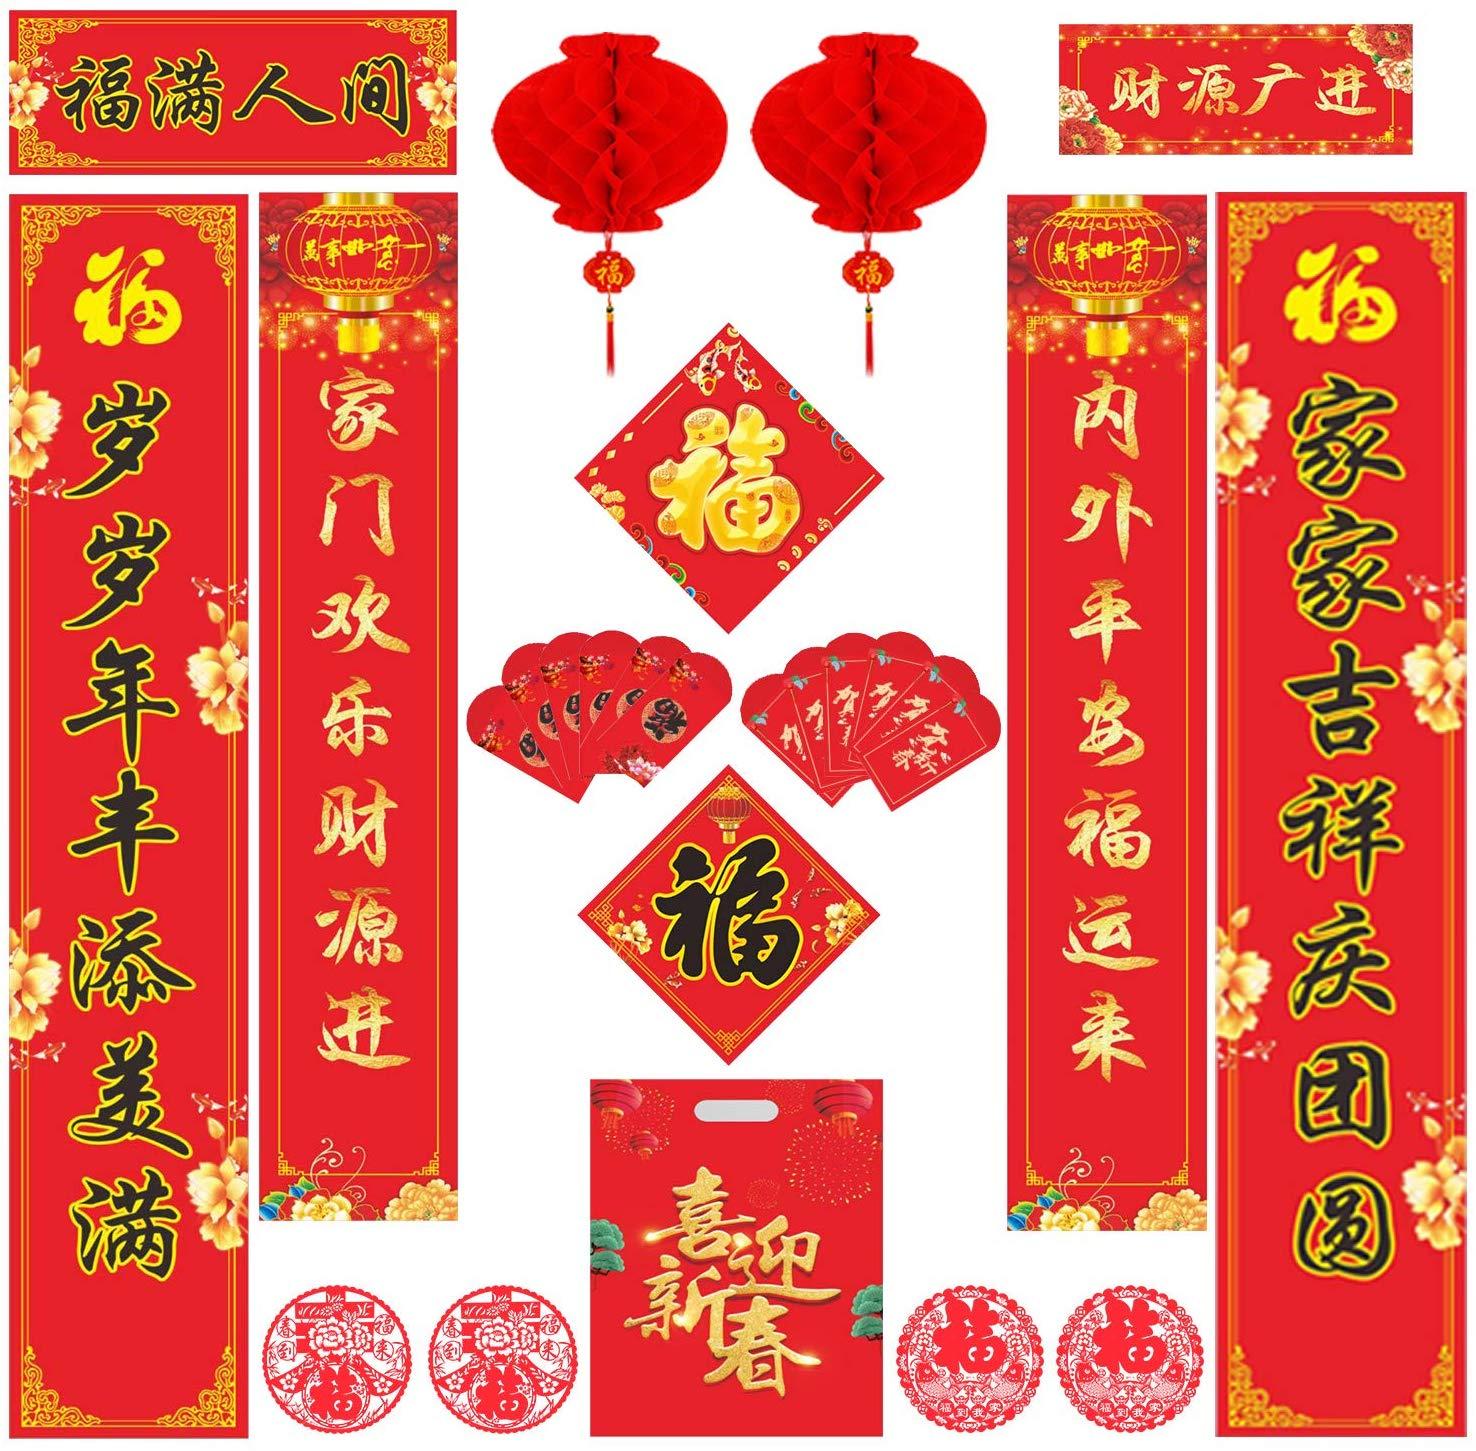 SHIYIXING 26PCS Chinese New Year Decorations 2020 Spring Festival Couplets, Wall Stickers Poem Red Lantern Wallpaper Red Envelope Fu Paper Chunlian